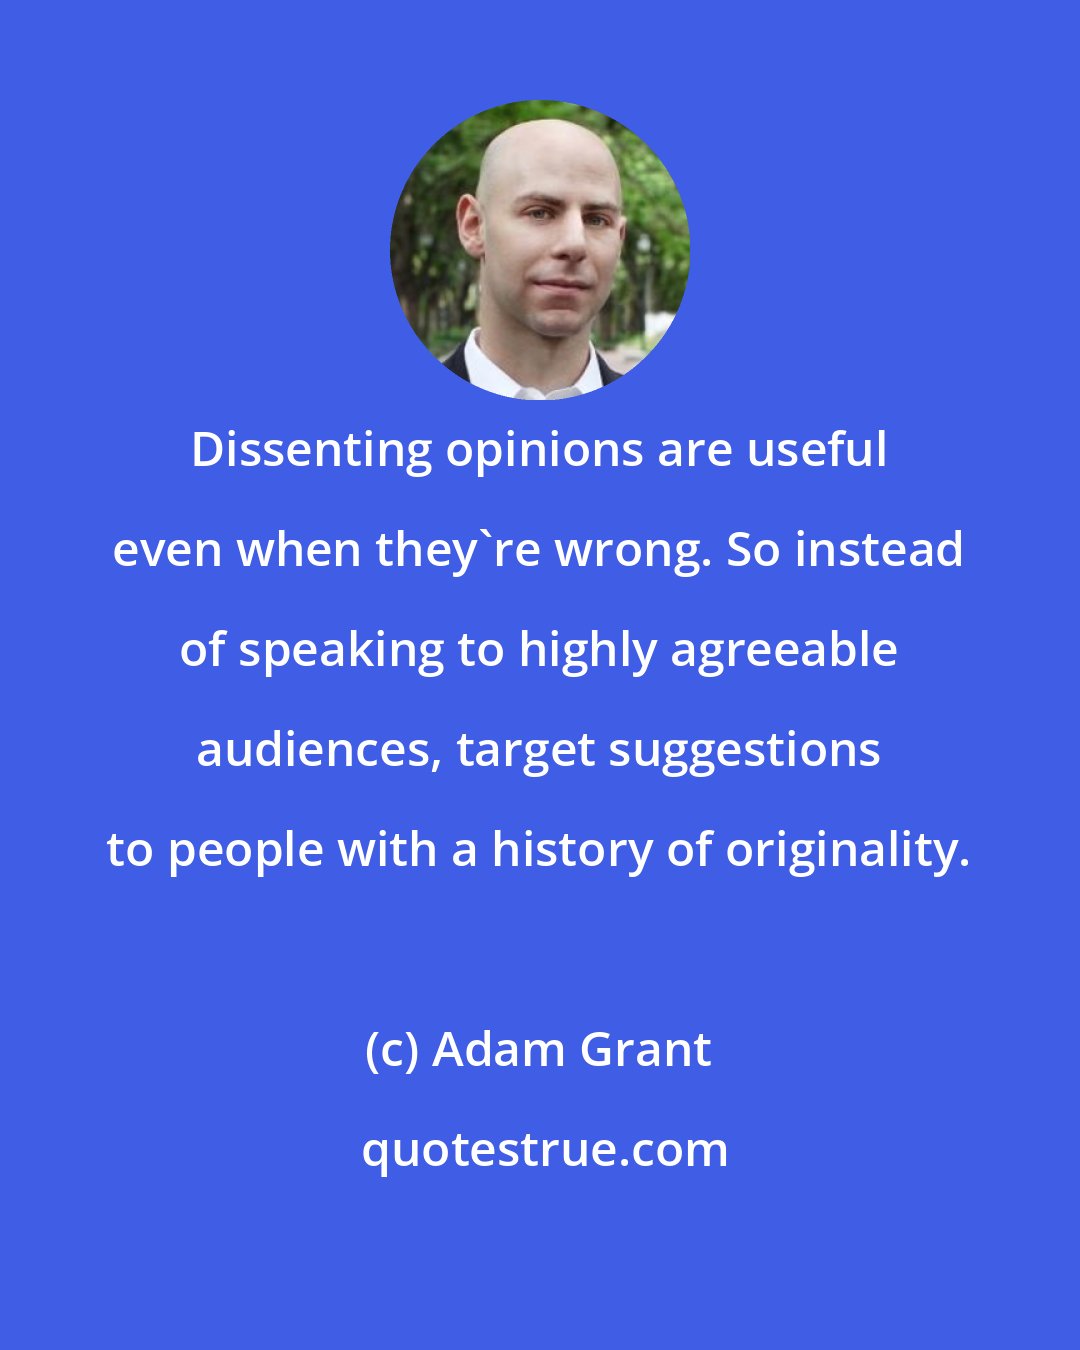 Adam Grant: Dissenting opinions are useful even when they're wrong. So instead of speaking to highly agreeable audiences, target suggestions to people with a history of originality.